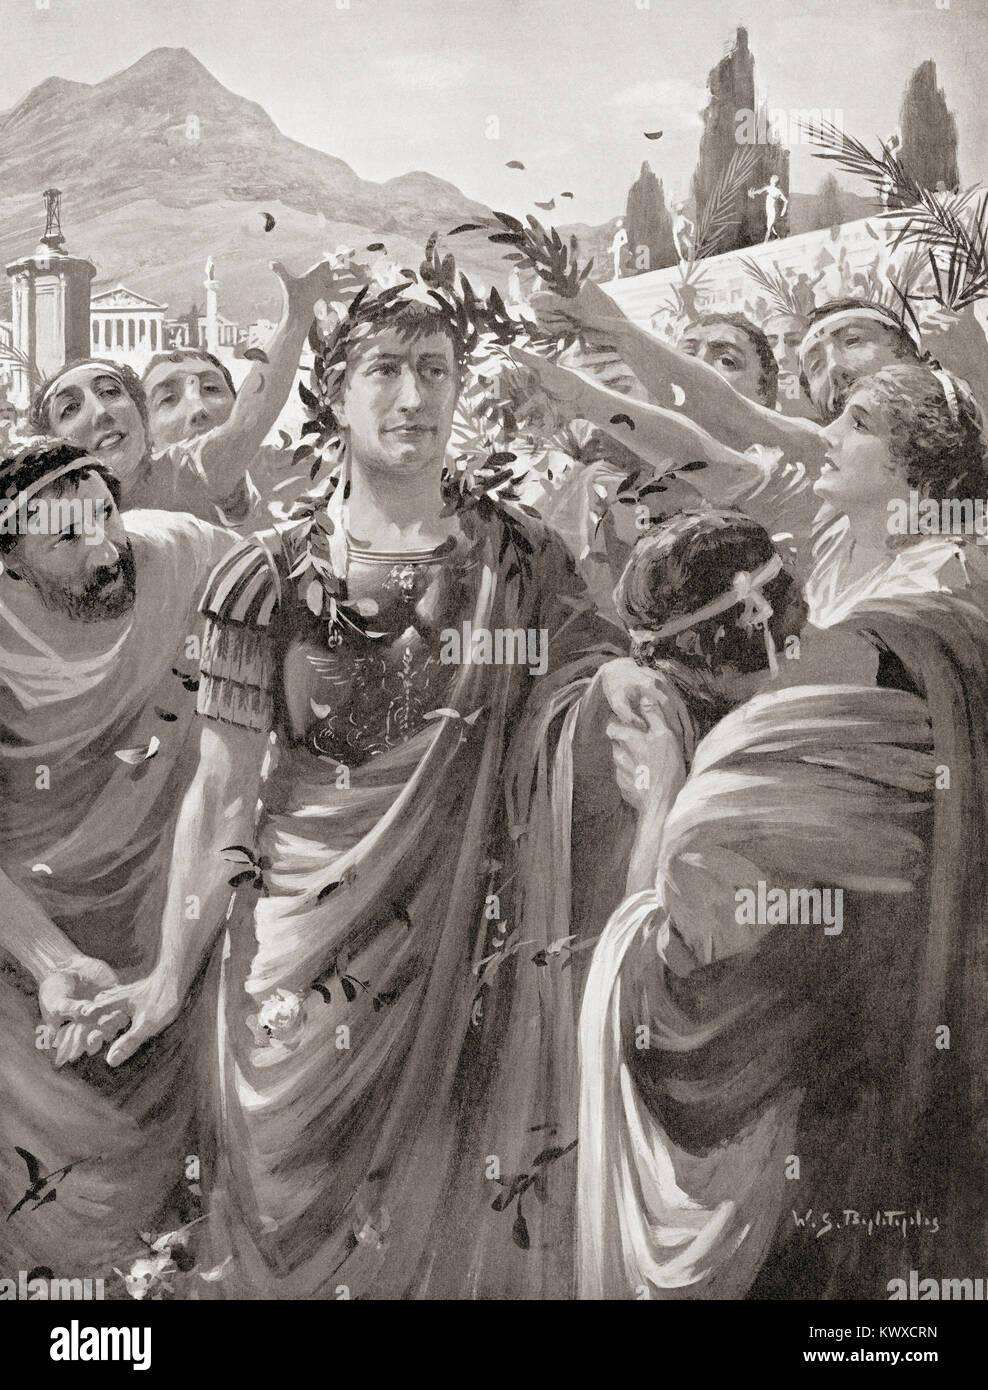 Flamininus at the Isthmian Games in Corinth, 196 BC  proclaiming the freedom of the Greek states.  Titus Quinctius Flamininus, c. 229–174 BC.  Roman politician and general instrumental in the Roman conquest of Greece.  After the painting by W.S. Bagdatopoulus, (1888 -1965).   From Hutchinson's History of the Nations, published 1915. Stock Photo